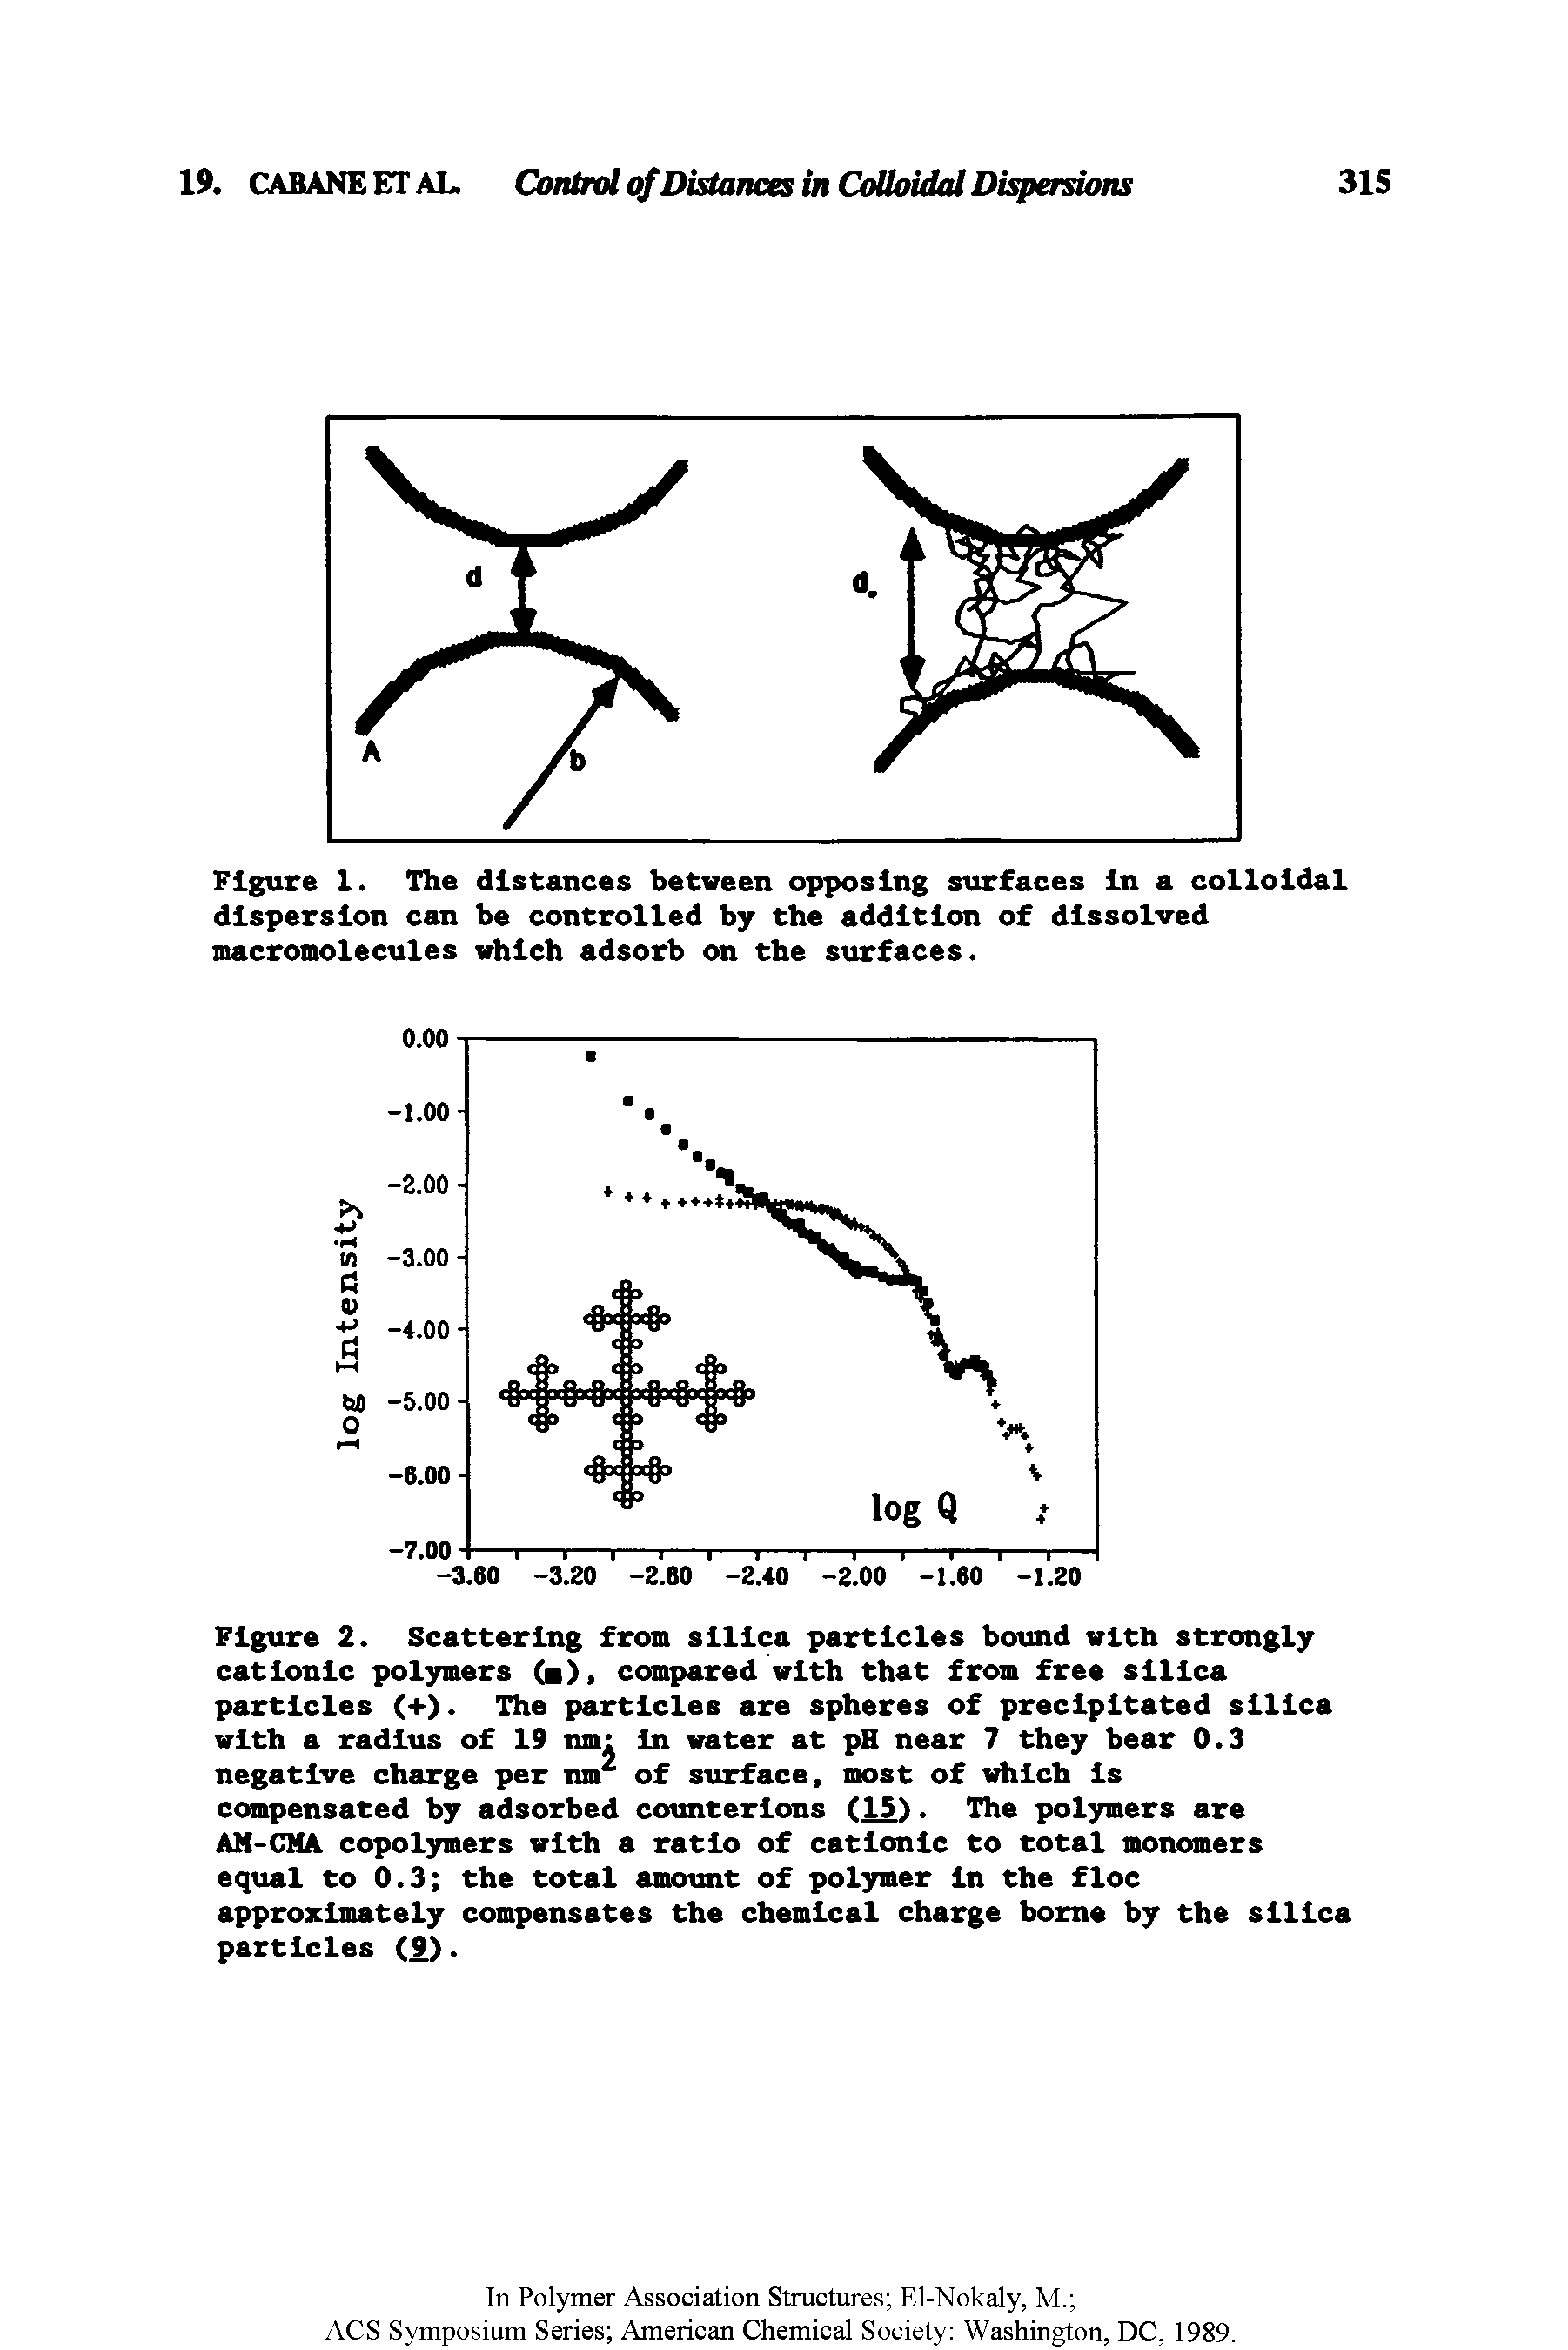 Figure 2. Scattering from silica particles bound with strongly cationic polymers ( ), compared with that from free silica particles (+). The particles are spheres of precipitated silica with a radius of 19 nm In water at pH near 7 they bear 0.3 negative charge per nm of surface, most of which Is compensated by adsorbed counterions (15). The polymers are AM-CH copolymers with a ratio of cationic to total monomers equal to 0.3 the total amount of polymer In the floe approximately compensates the chemical charge borne by the silica particles (9).